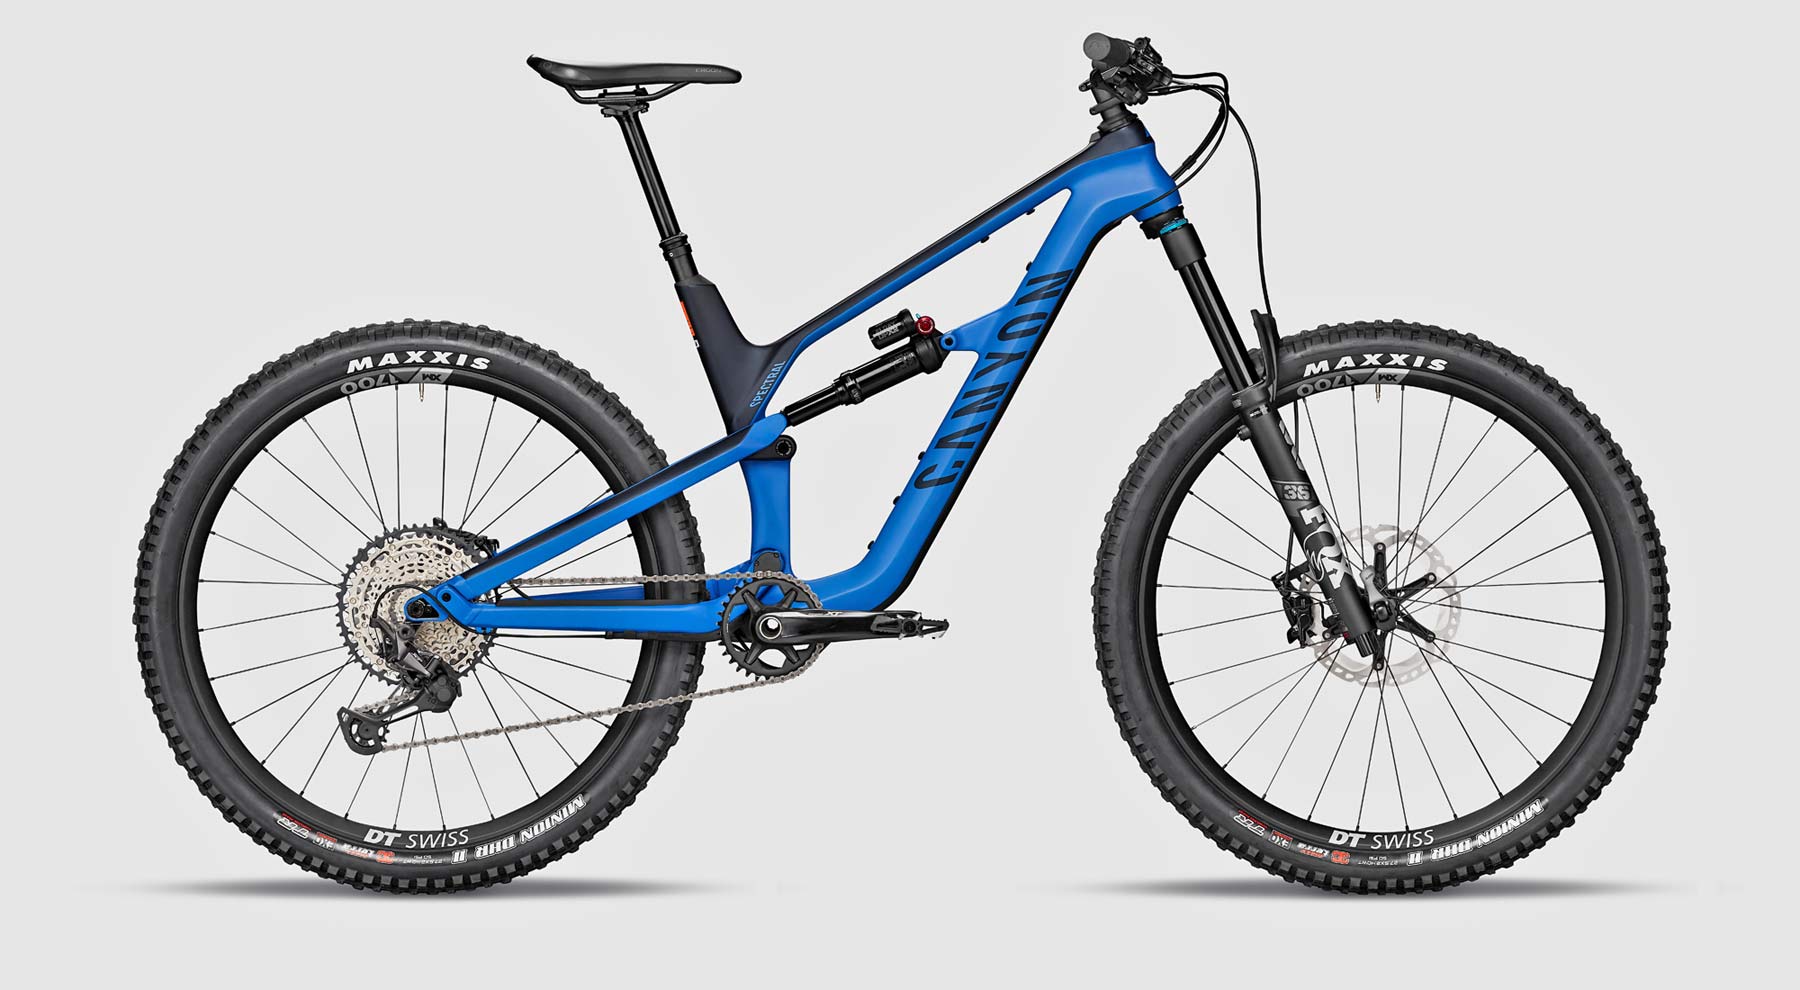 2021 Canyon Spectral trail bike, 27.5" 150mm all-mountain bike in carbon or alloy, CF 8